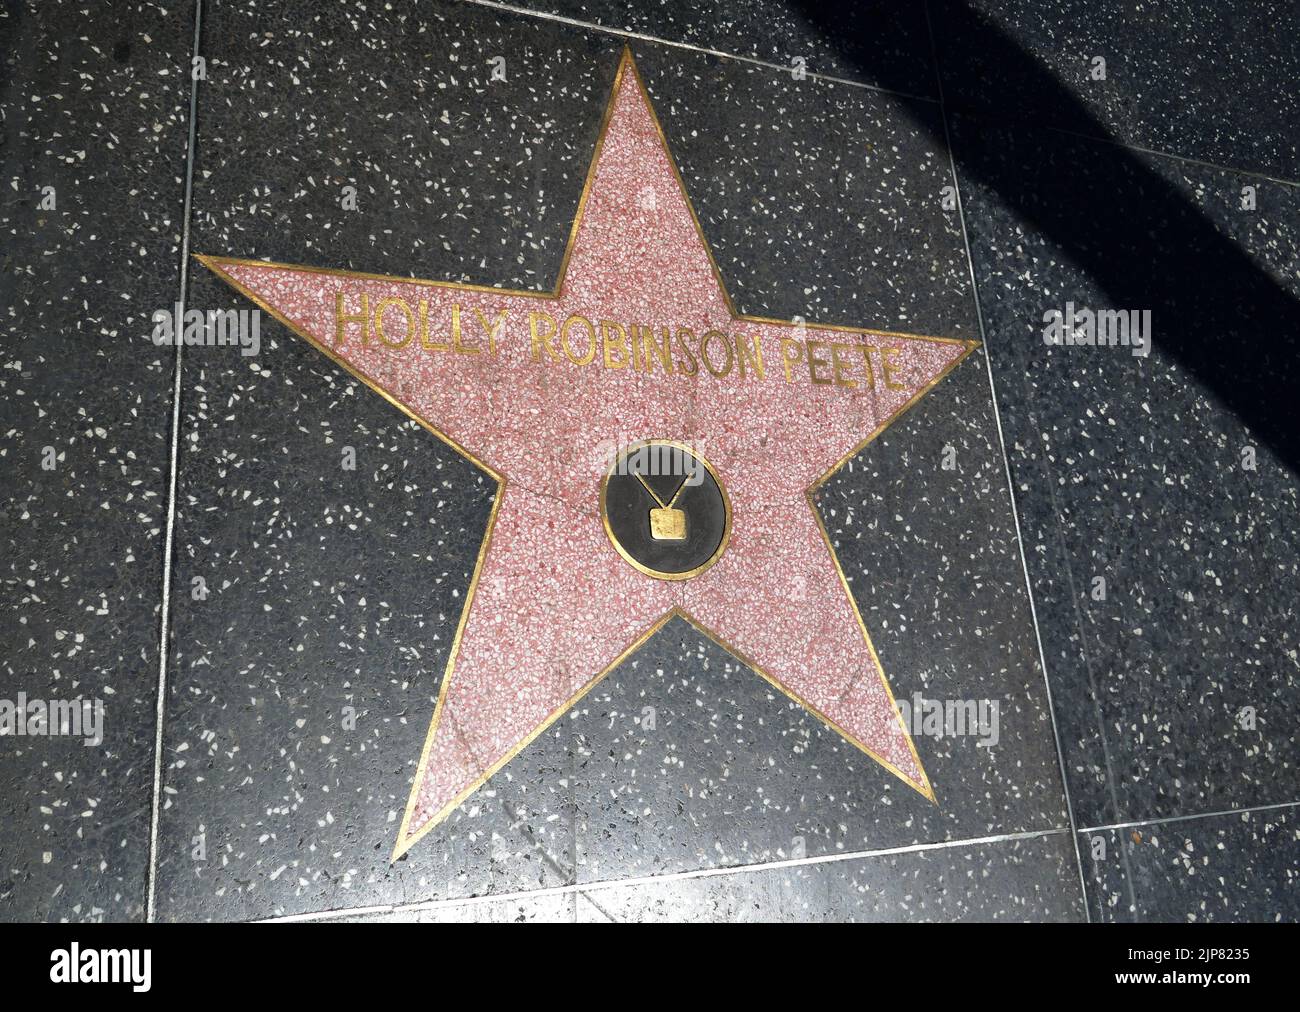 Los Angeles, California, USA 15th August 2022 Actress Holly Robinson-Peete's Star on the Hollywood Walk of Fame on August 15, 2022 in Los Angeles, California, USA. Photo by Barry King/Alamy Stock Photo Stock Photo